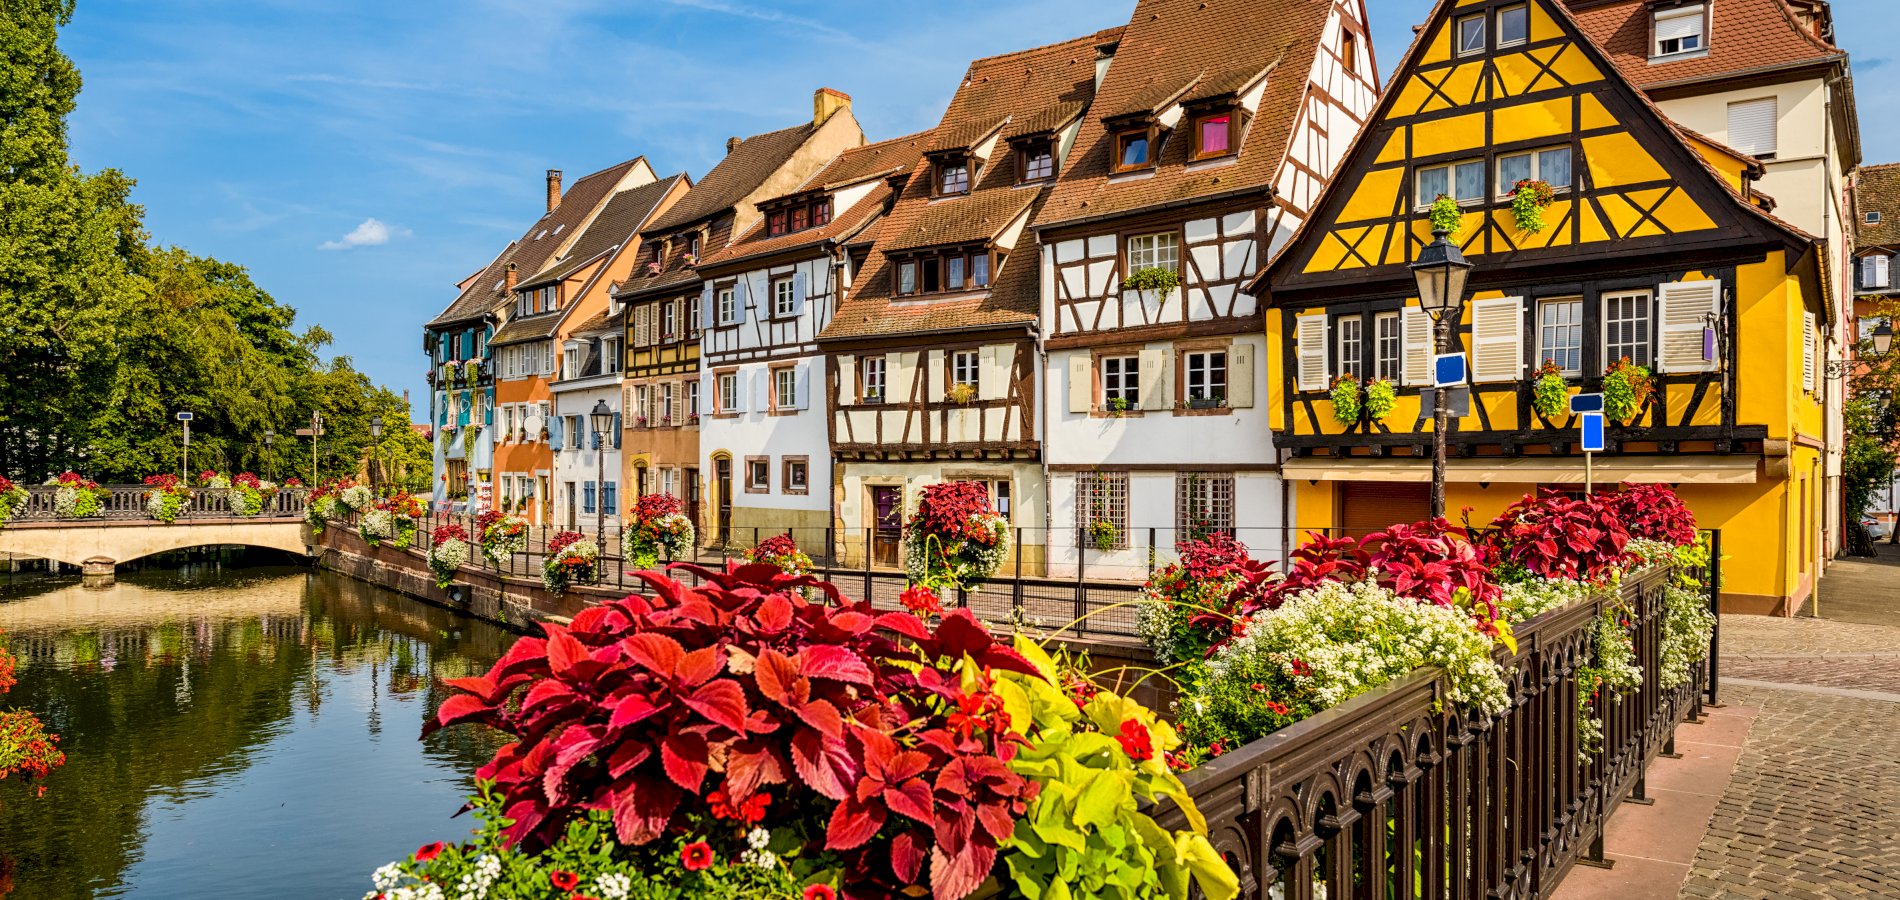 Ophorus Tours - 6 Days Alsace & Burgundy Shared Travel Package - 4* Hotel Option